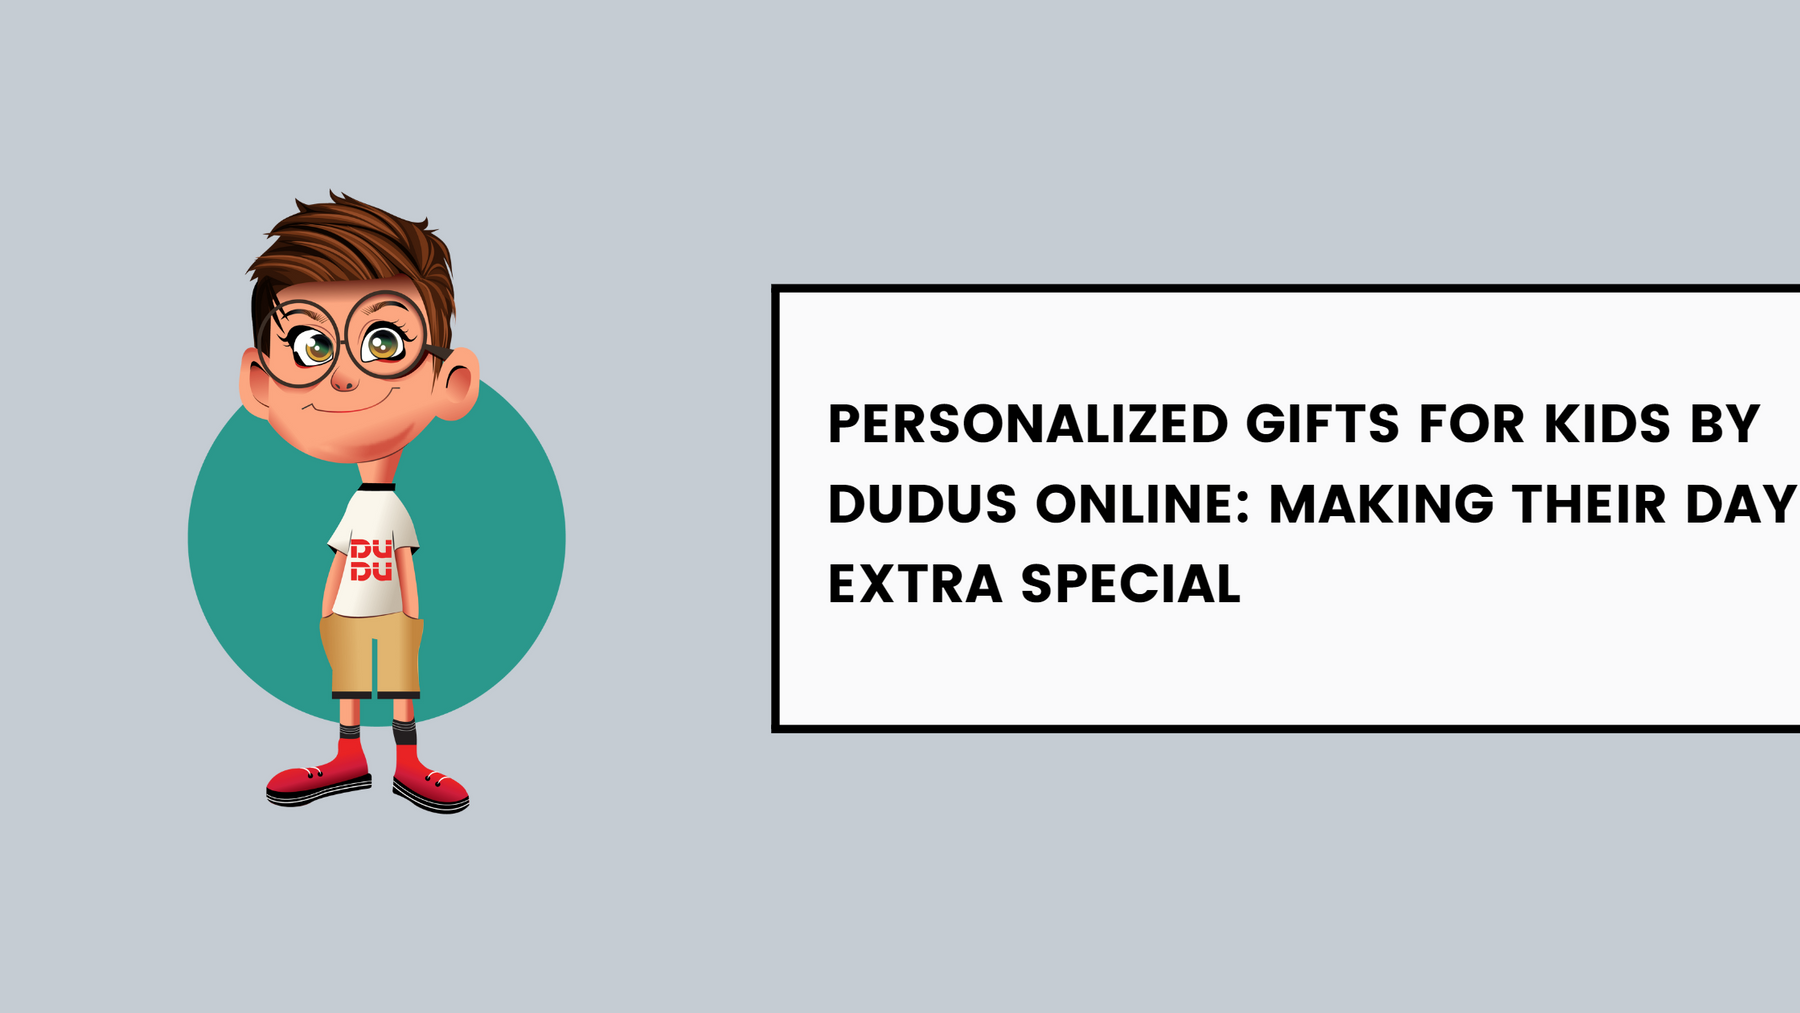 Personalized Gifts For Kids By Dudus Online: Making Their Day Extra Special